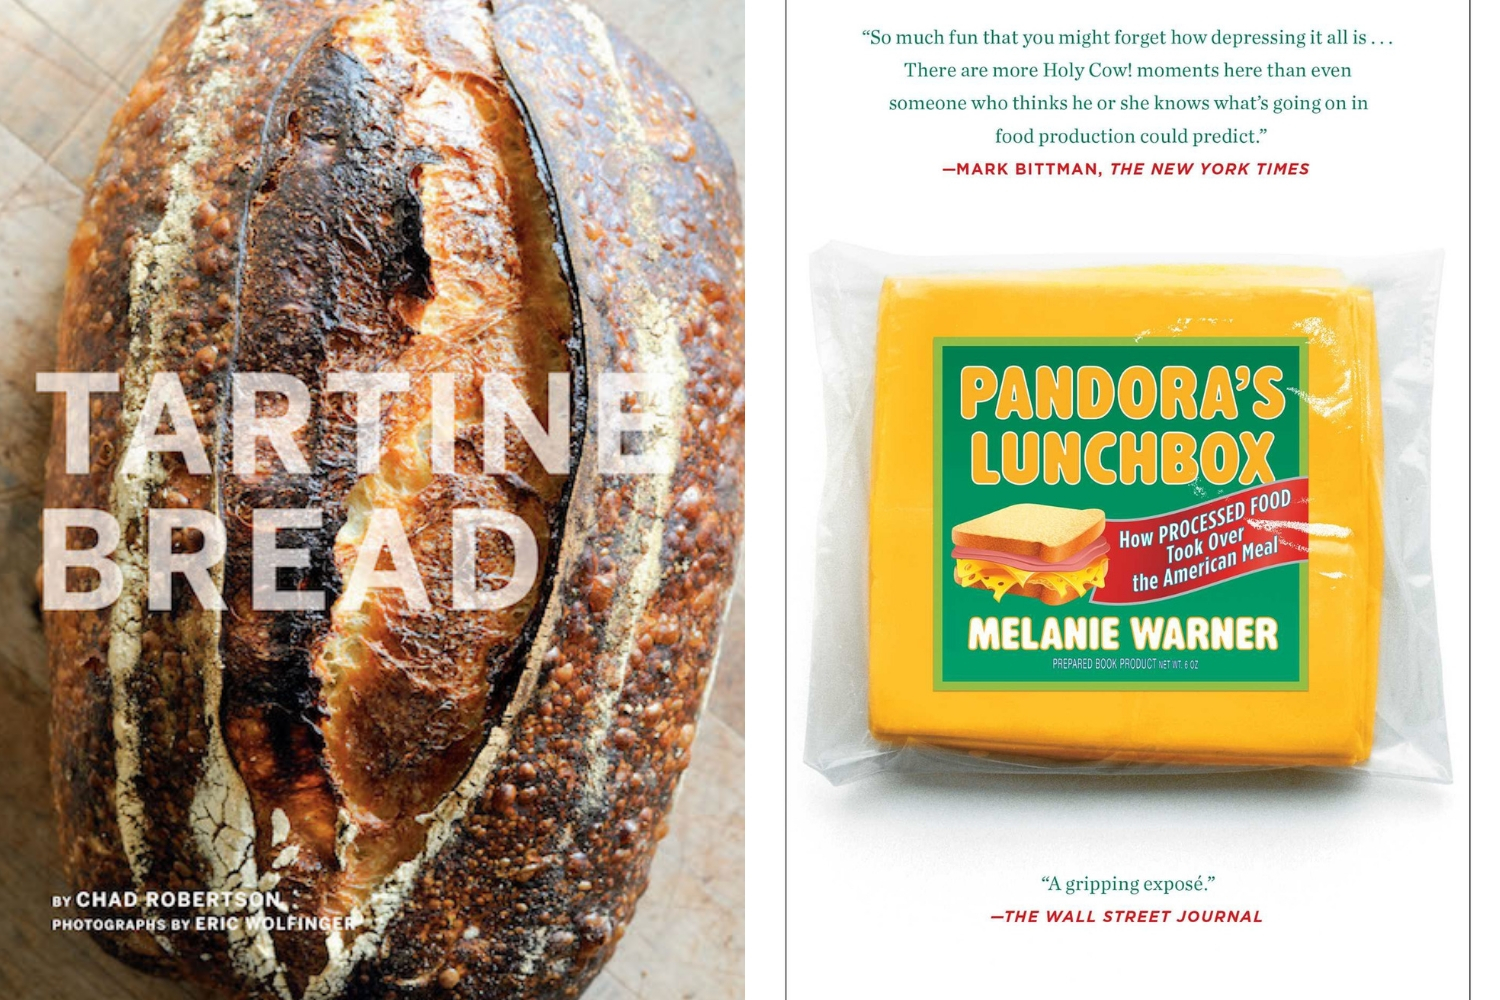 Edible Reads for Edible Idaho discusses Tartine Bread by Chad Robertson and Pandora's Lunchbox by Melanie Warner.